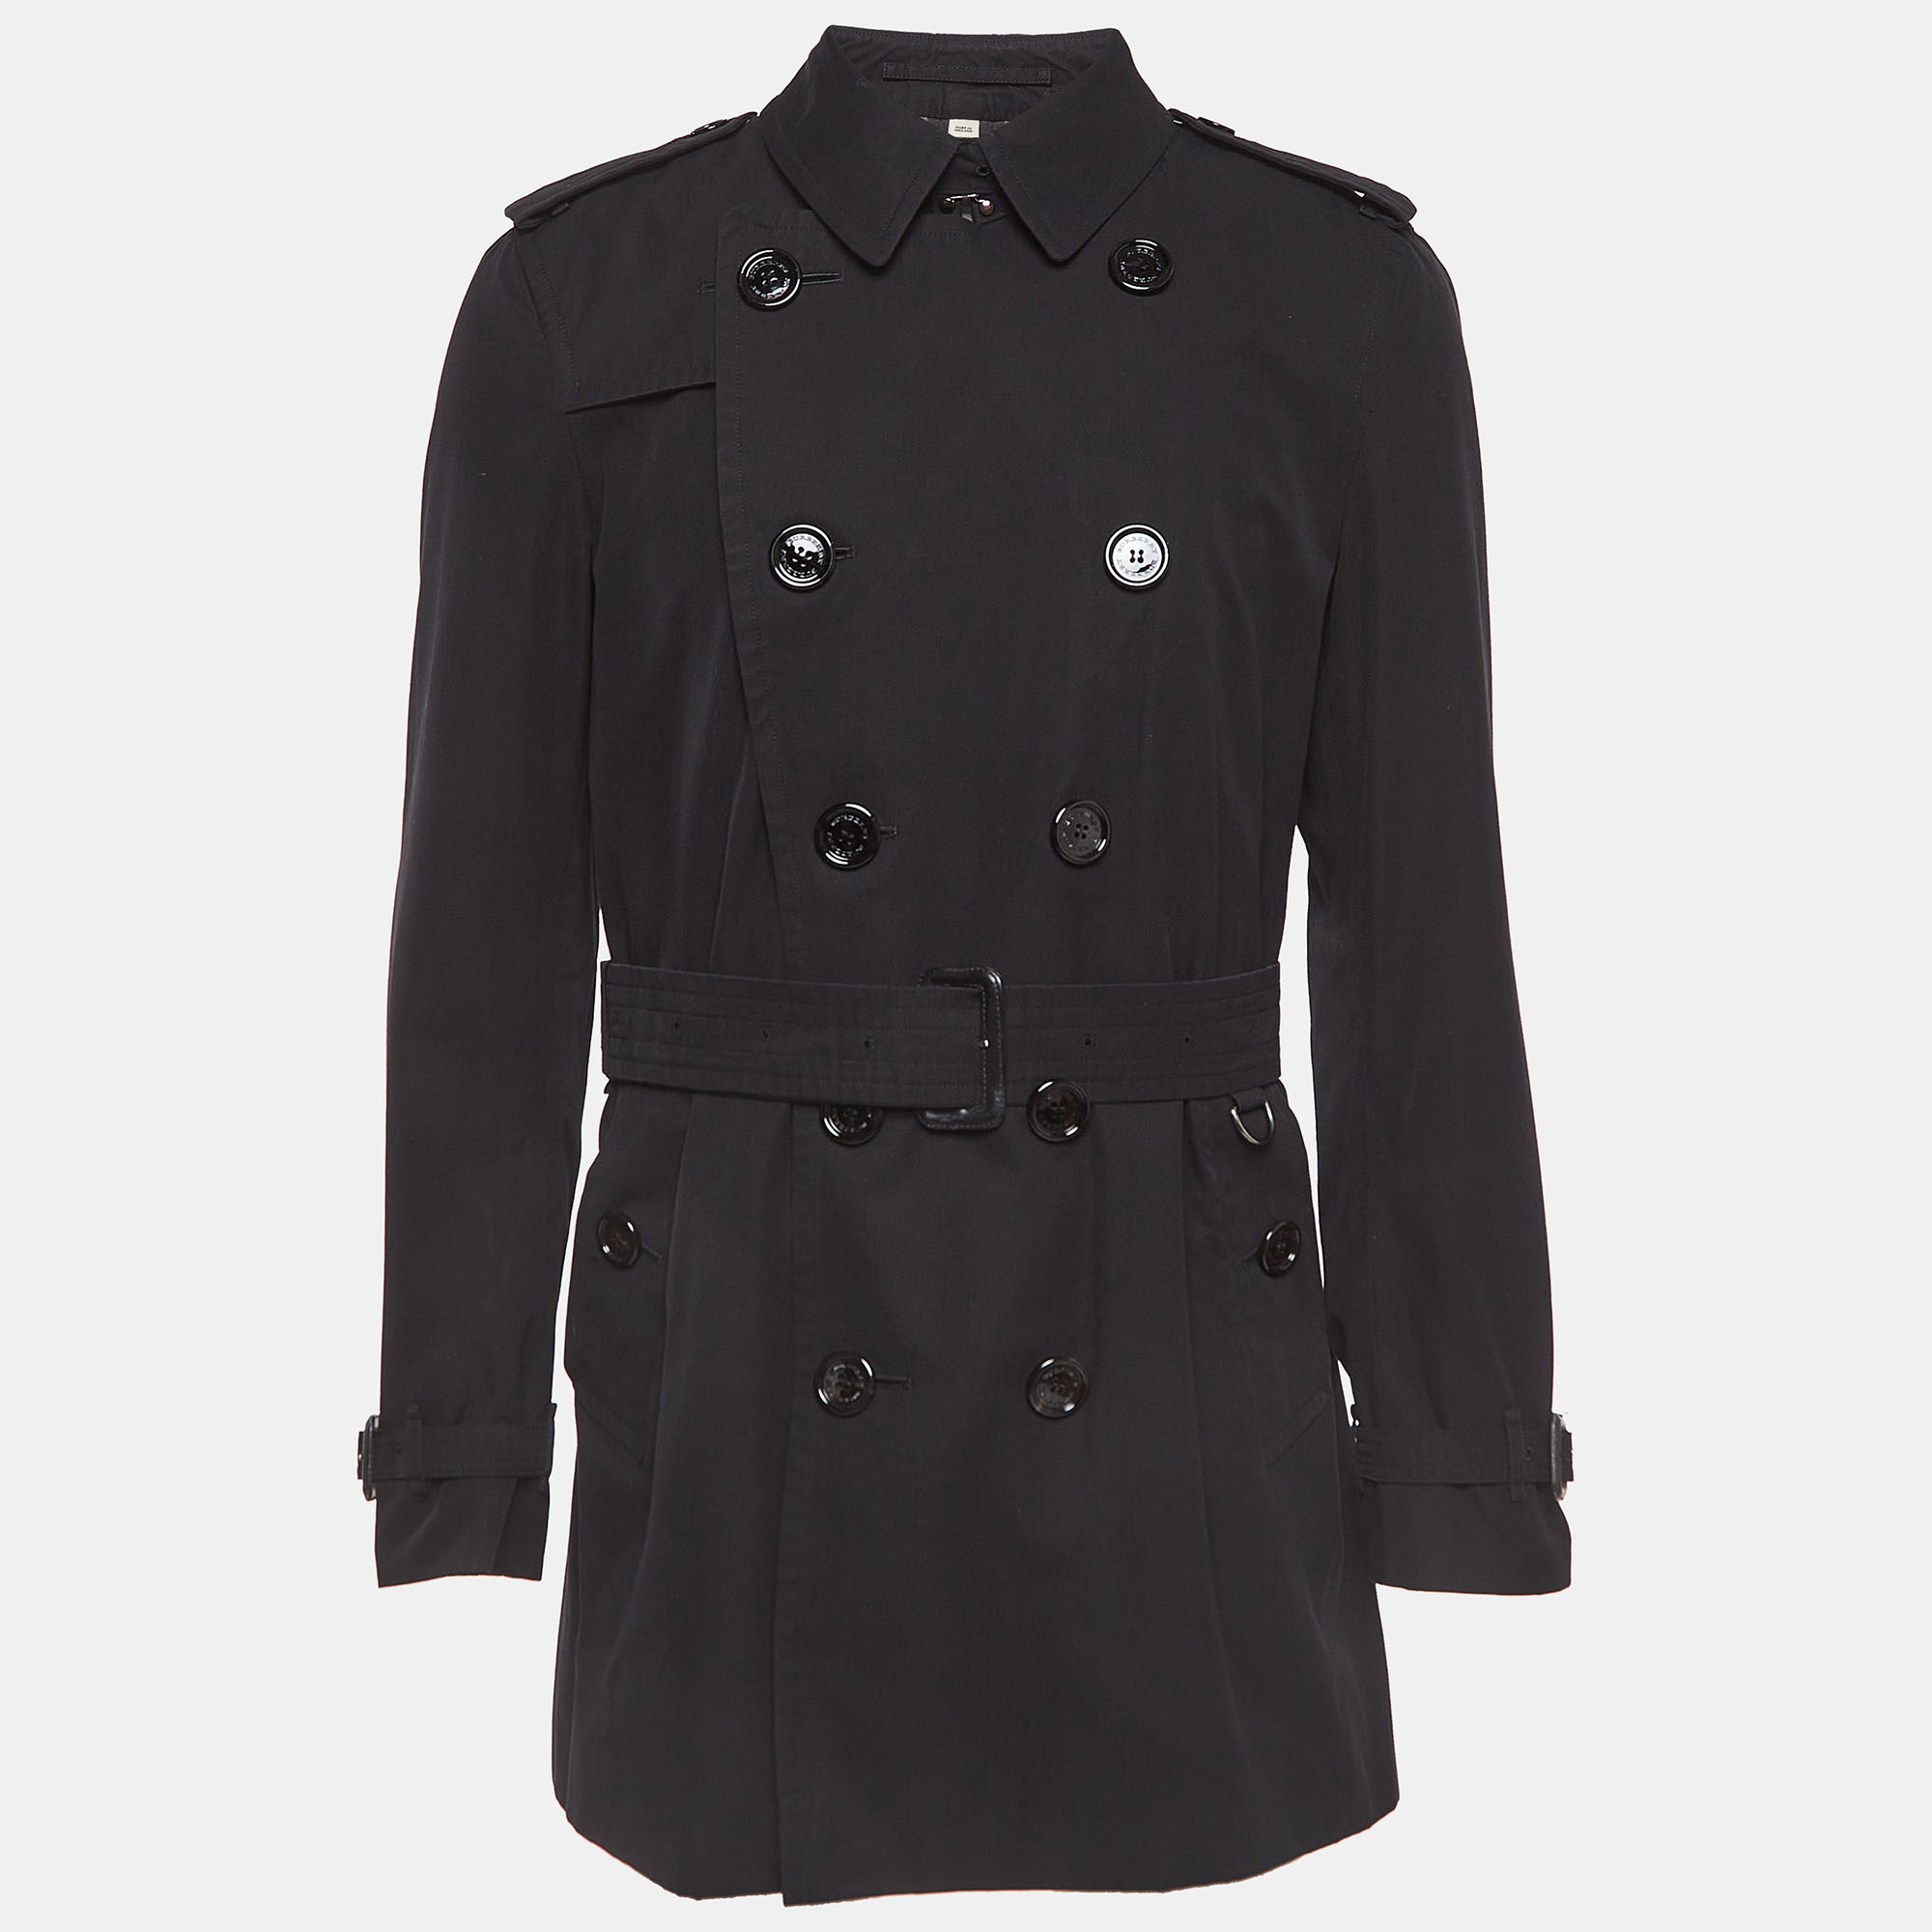 Burberry Black Cotton Double Breasted Sandringham Trench Coat XL